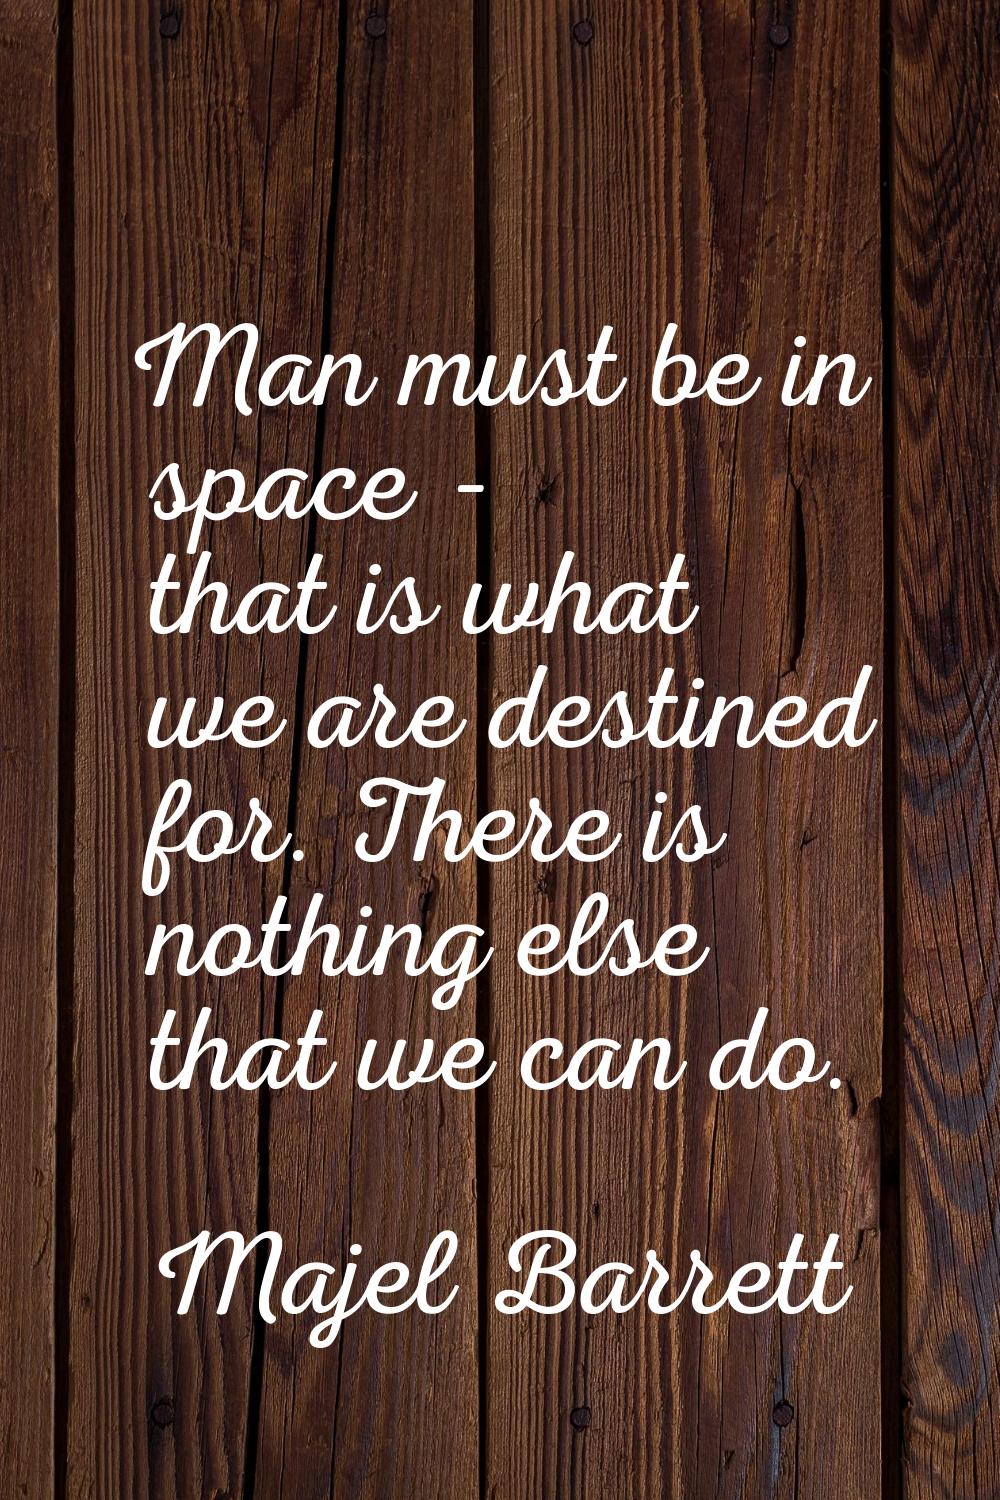 Man must be in space - that is what we are destined for. There is nothing else that we can do.